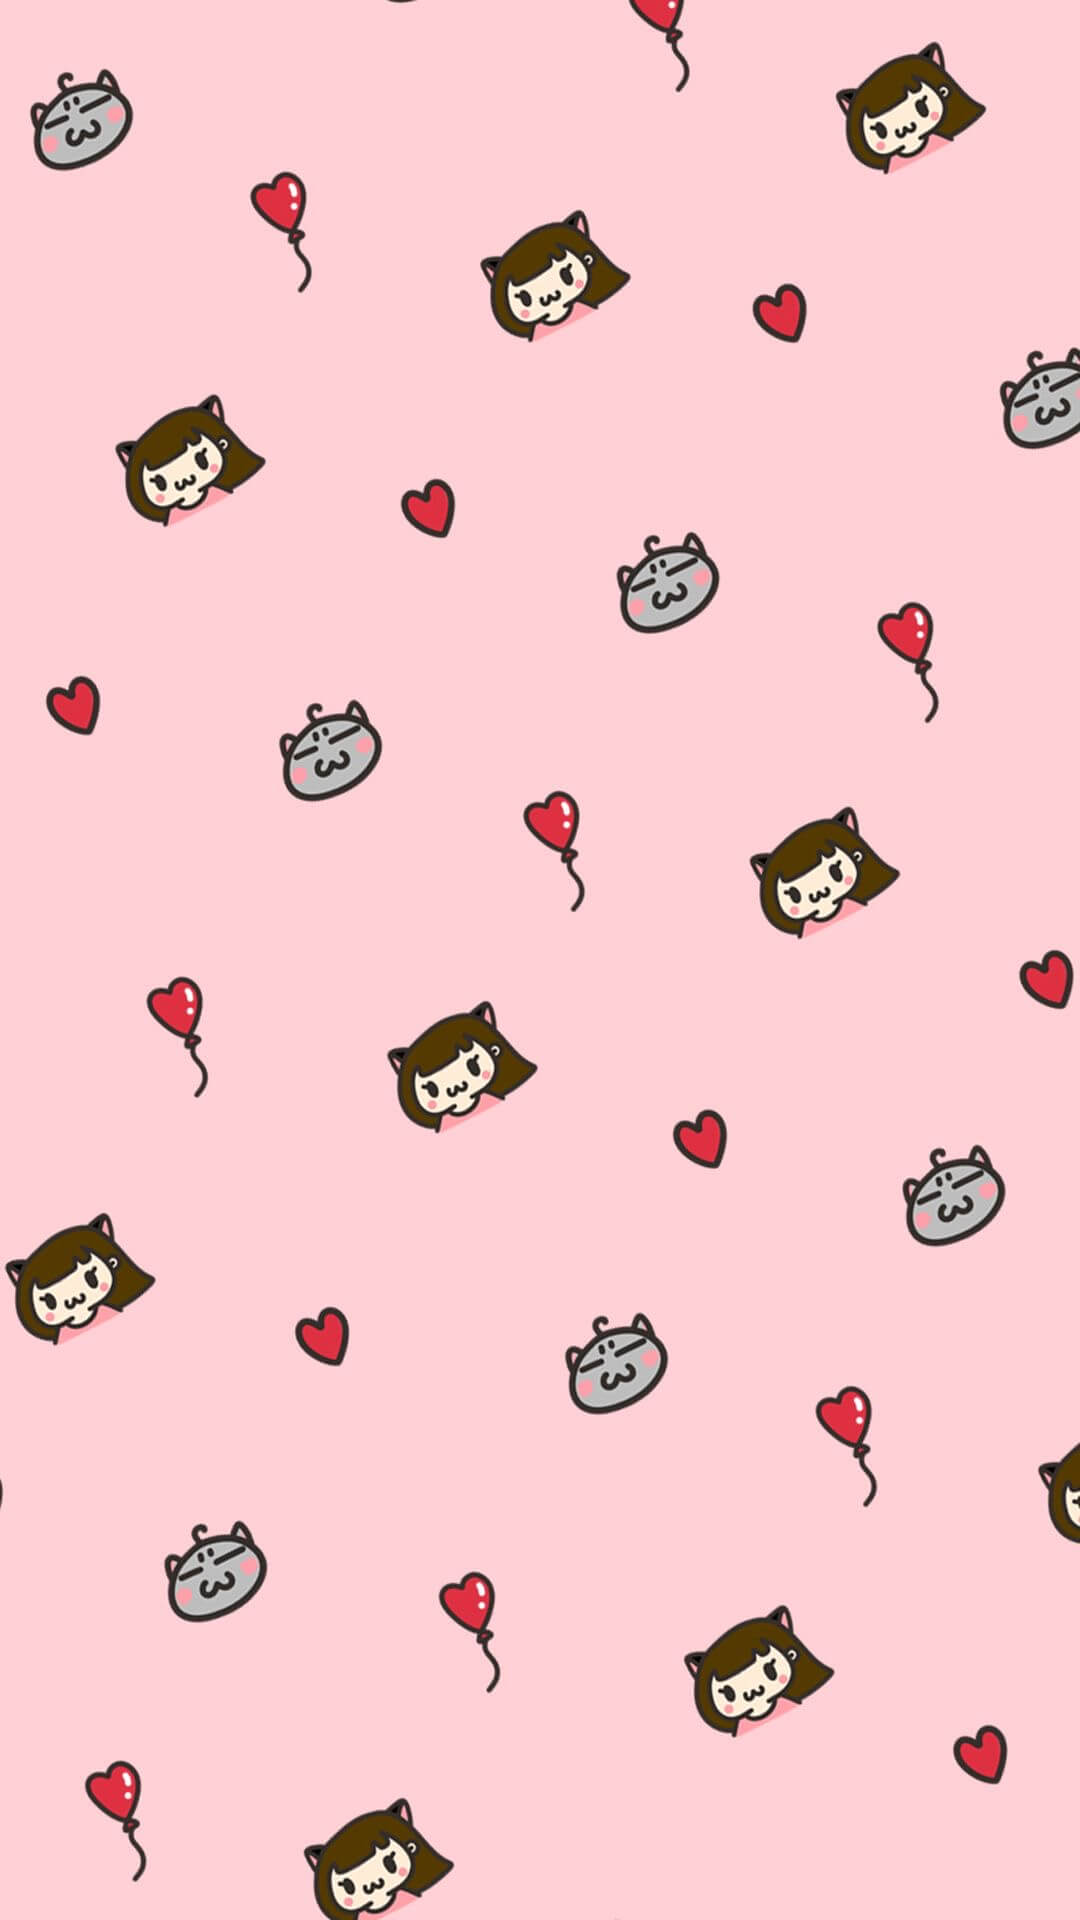 Are you looking for cute mobile wallpaper? Check out our 30+ cute free HD mobile wallpapers, please enjoy!